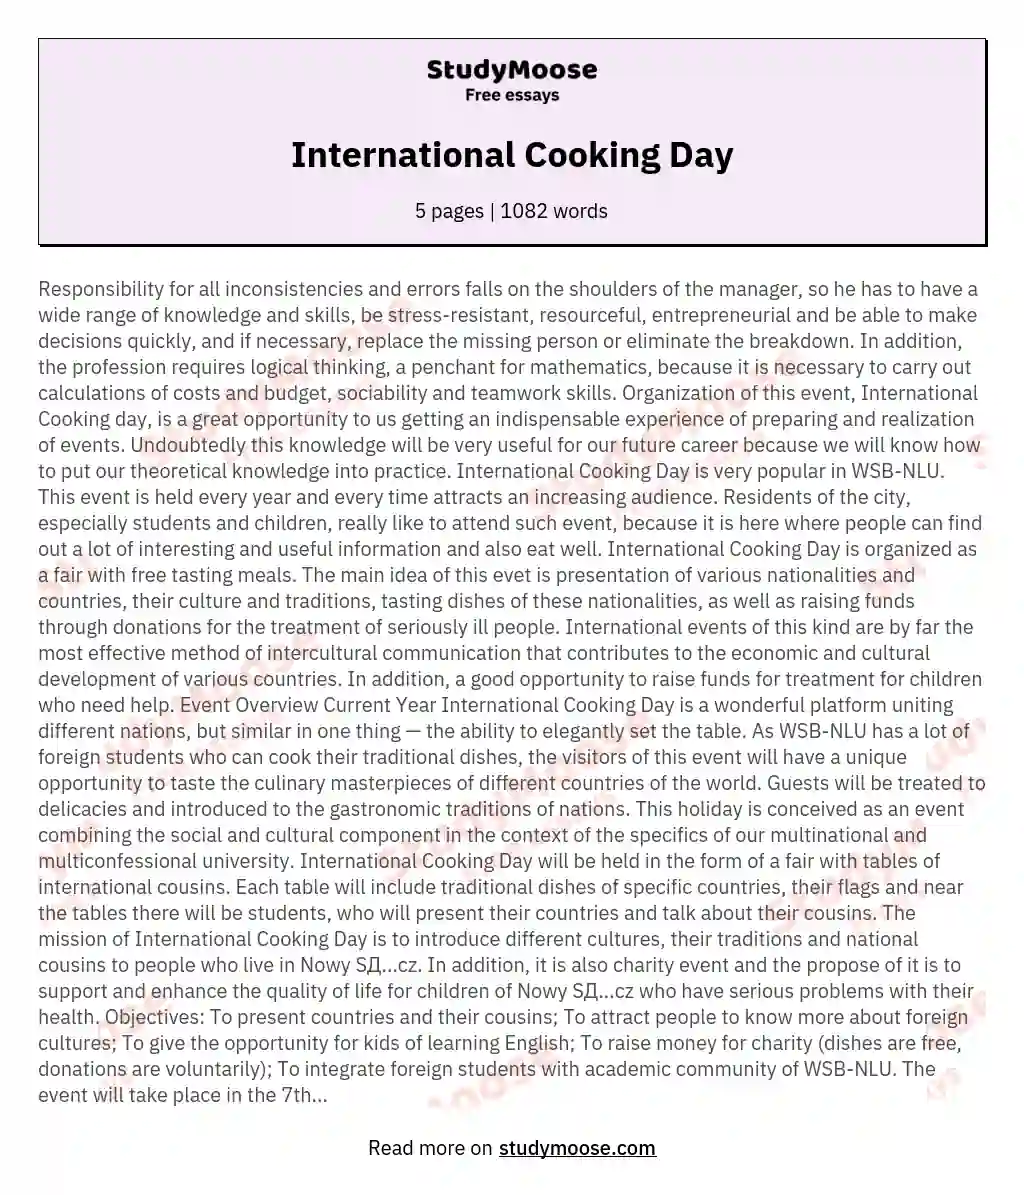 International Cooking Day essay